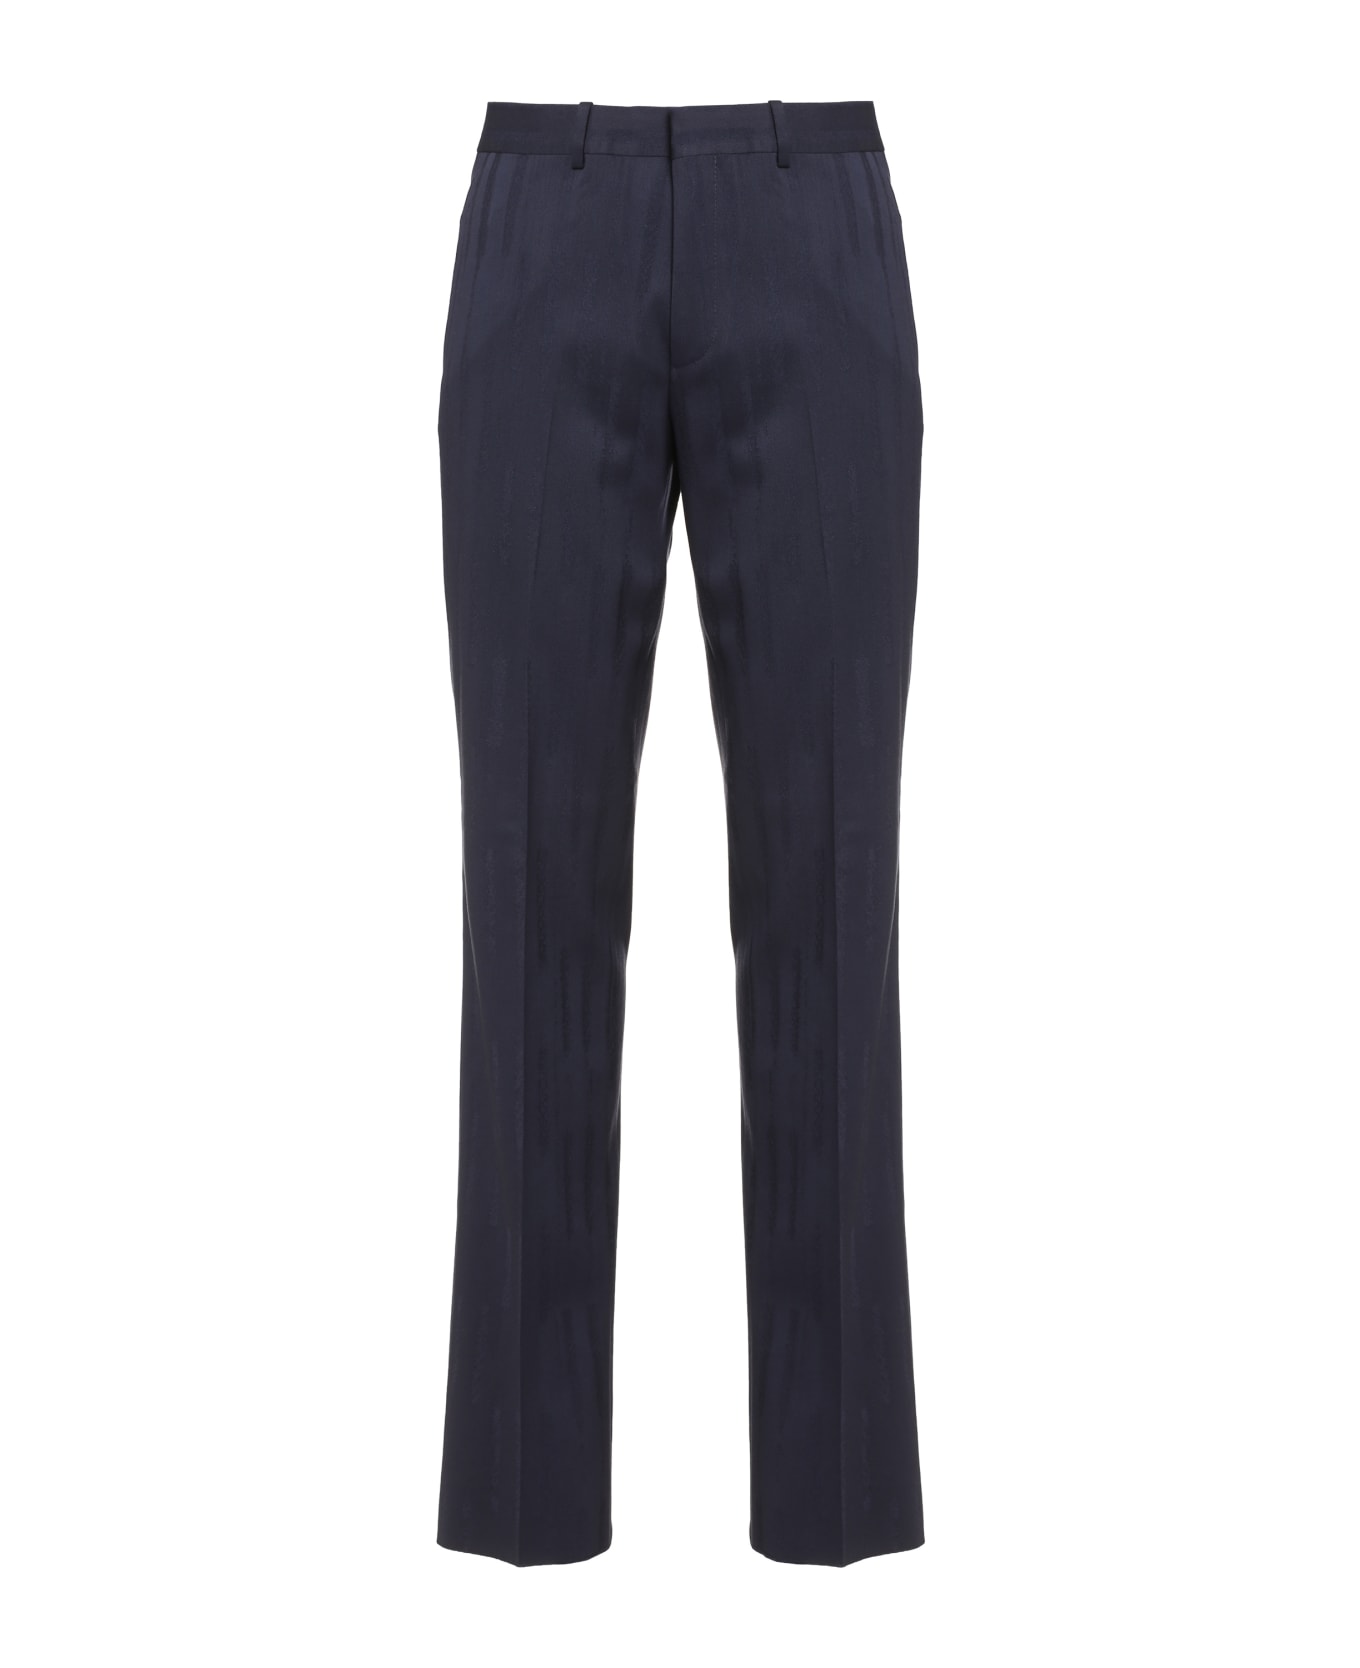 Off-White Slim Fit Tailored Trousers - blue